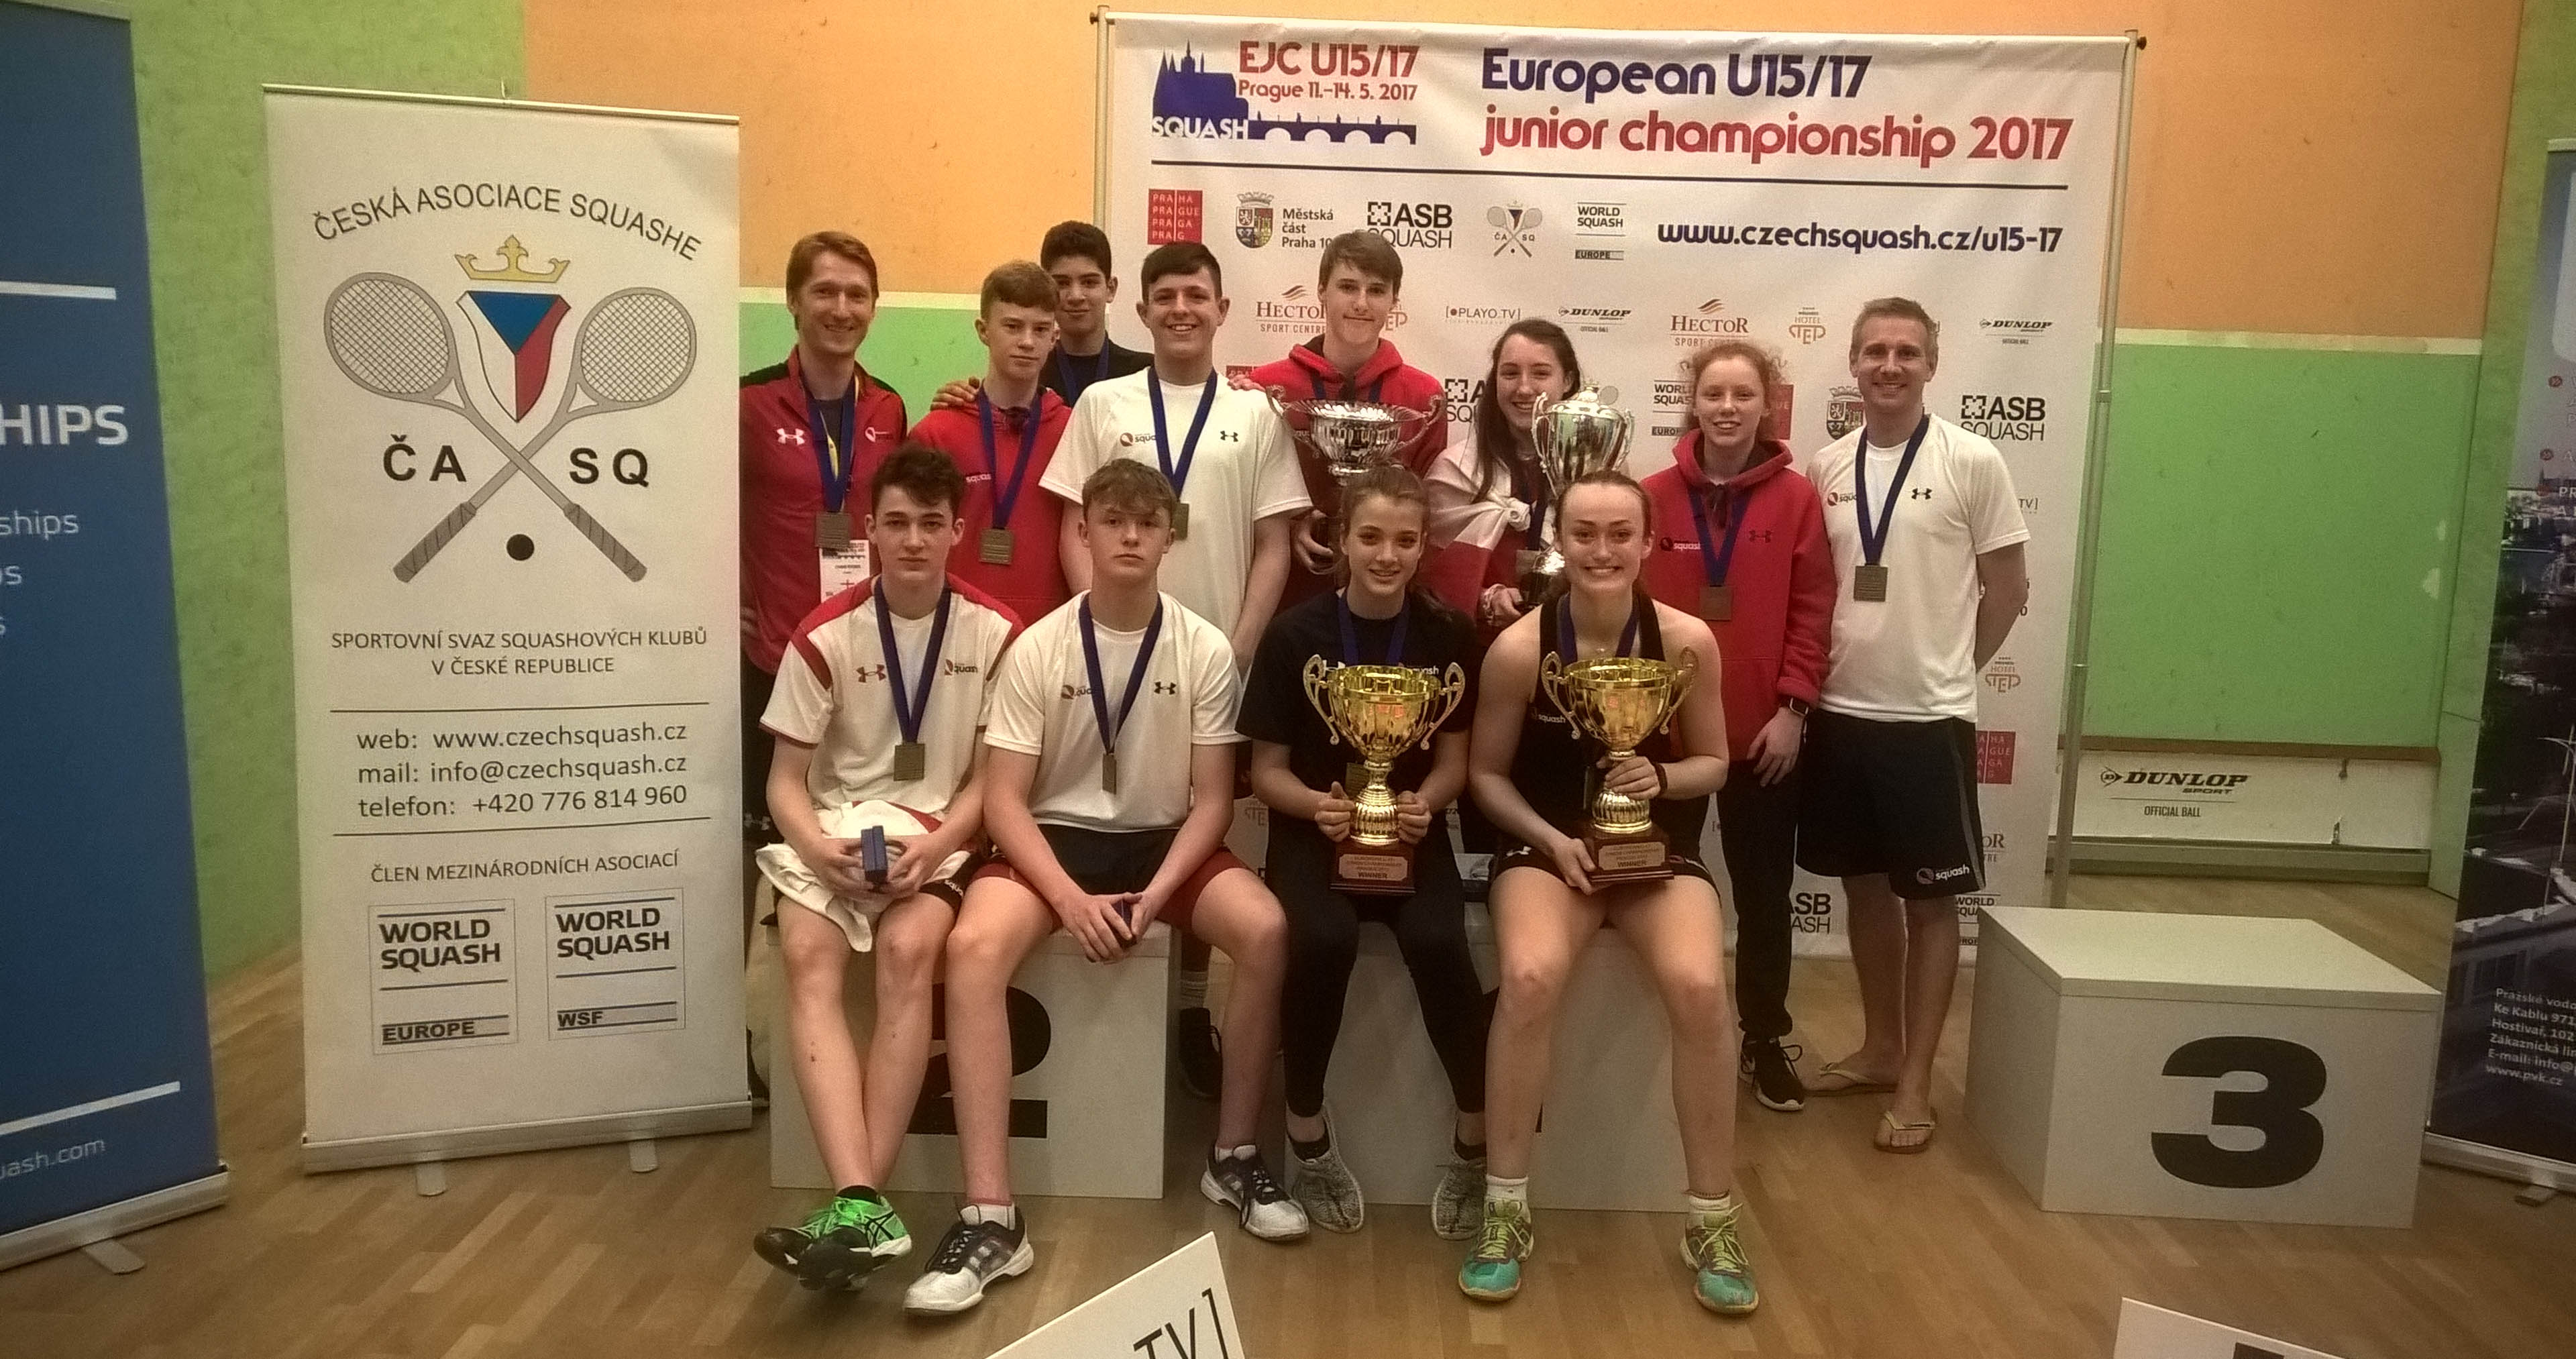 England's under-15s and under-17s won the European Team Championships titles in Prague